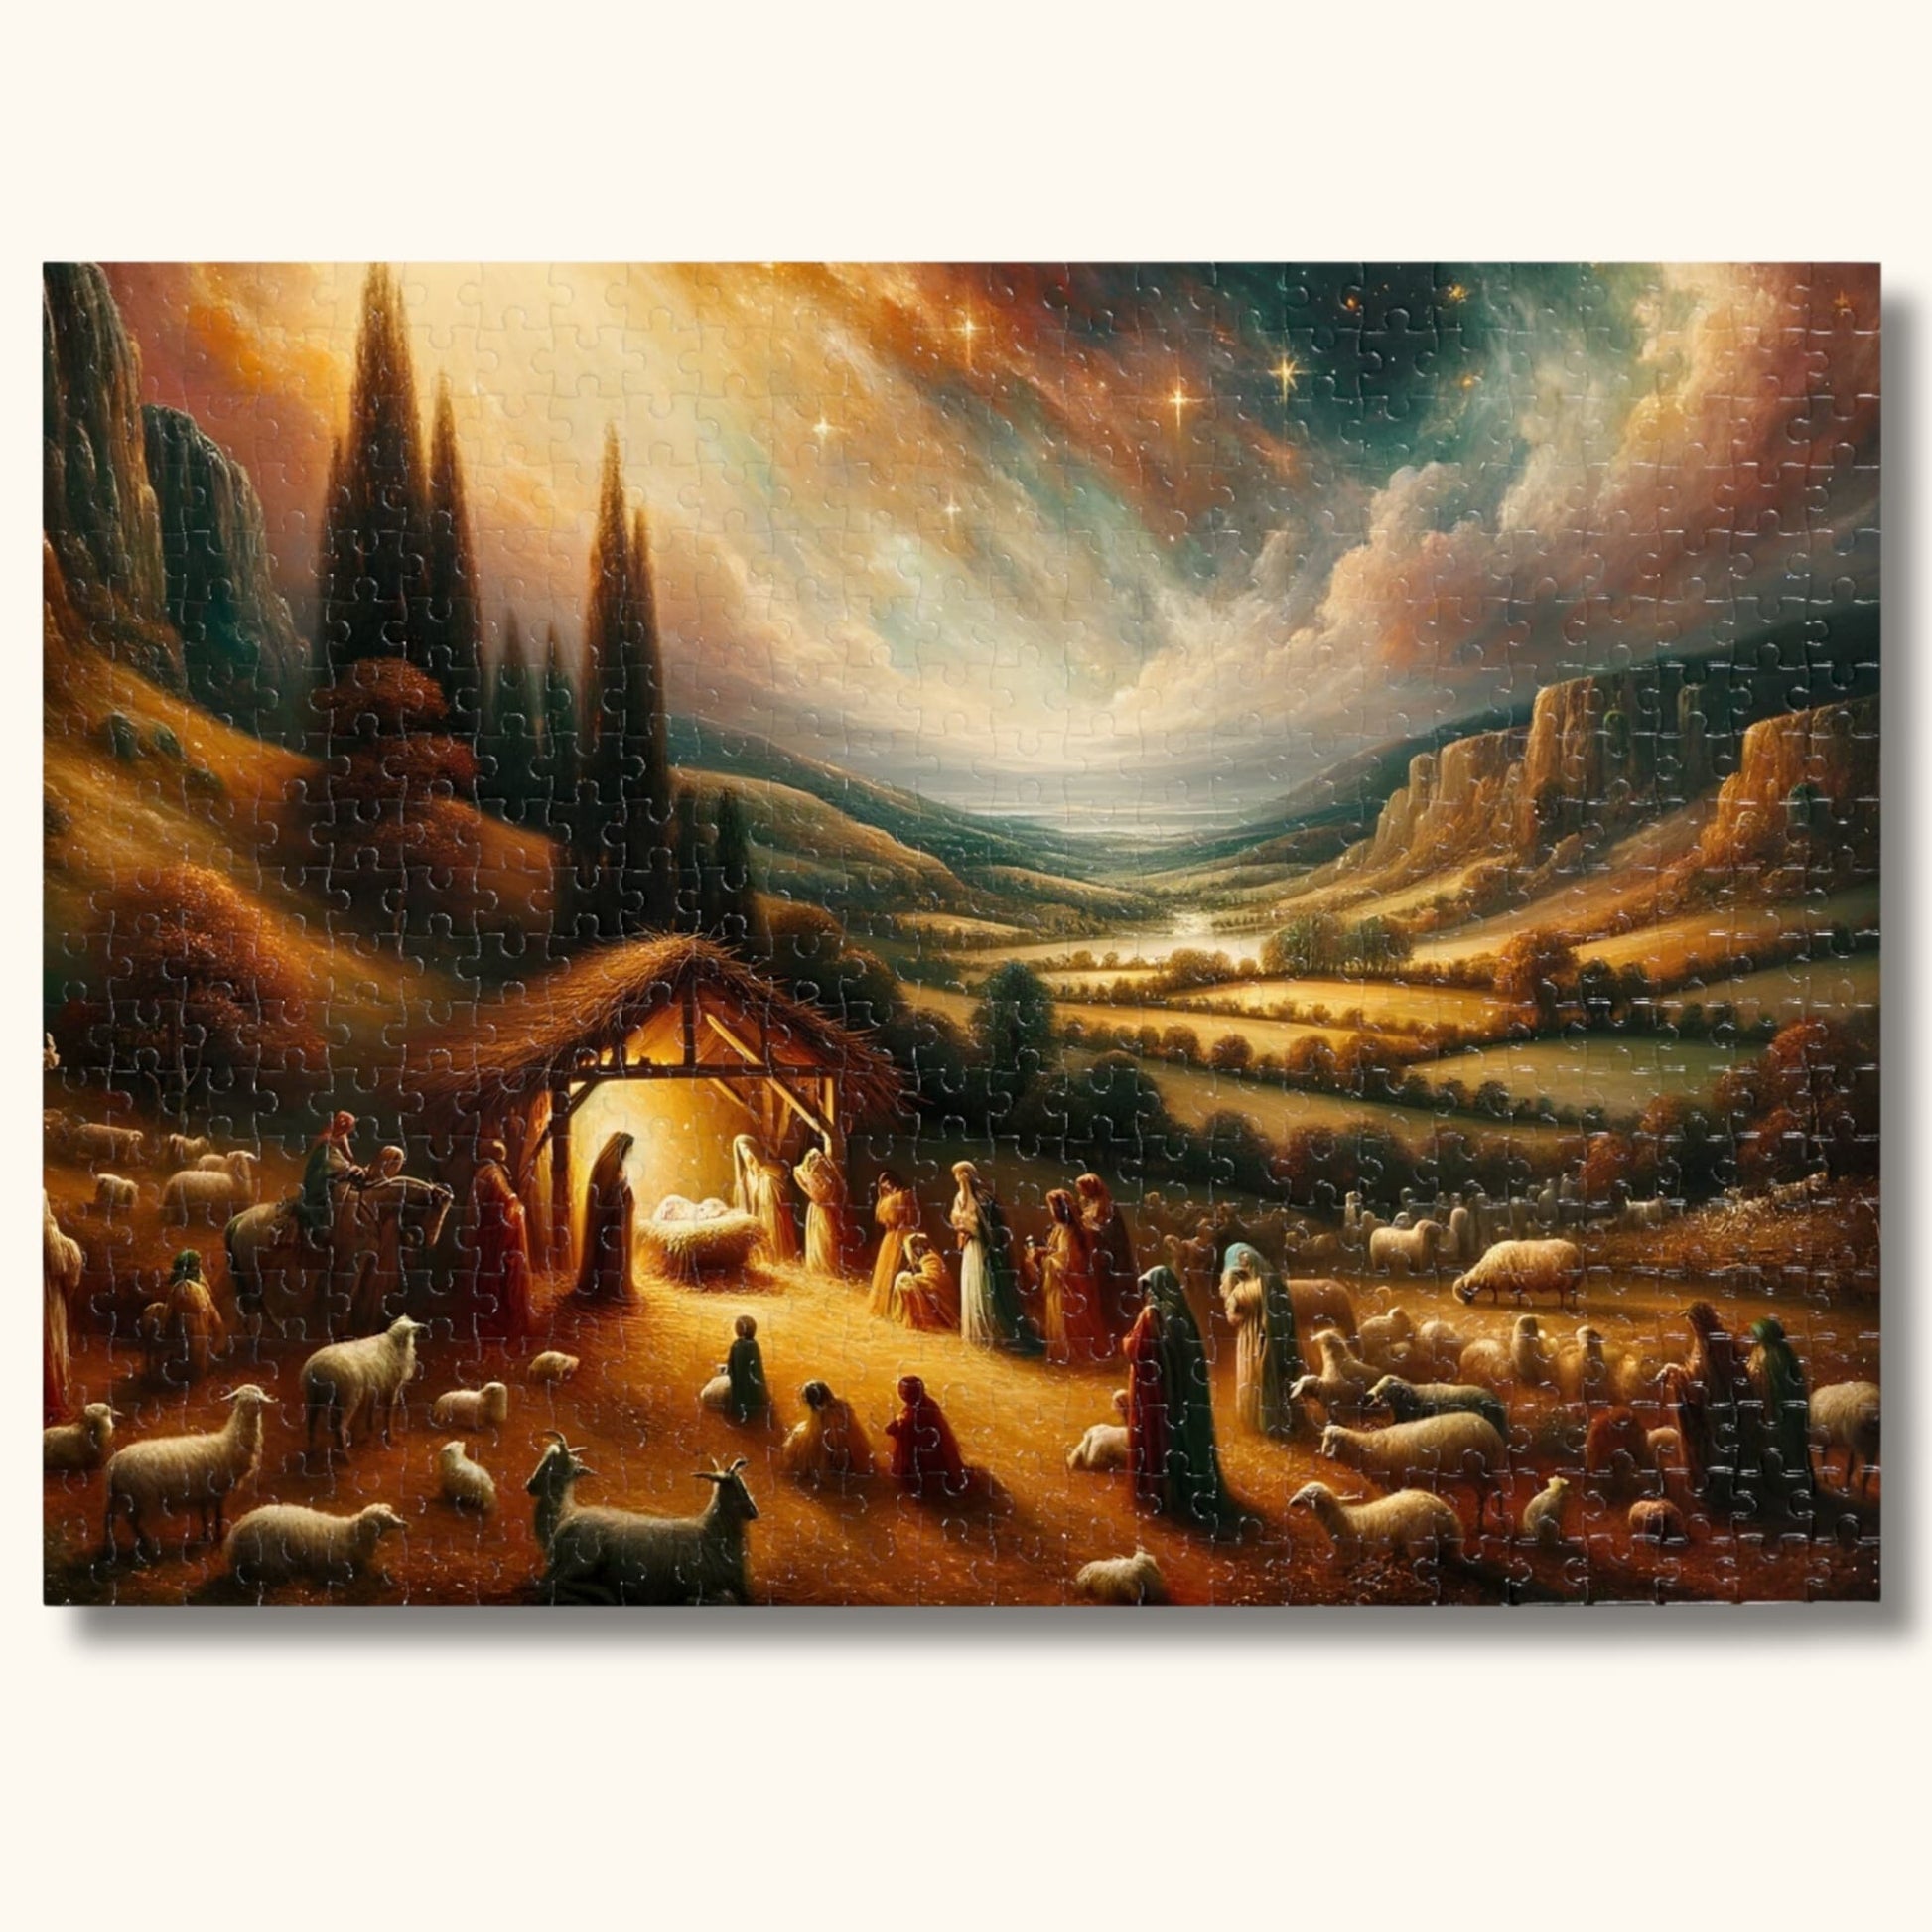 Main view of the 500-piece Nativity Scene Jigsaw Puzzle.